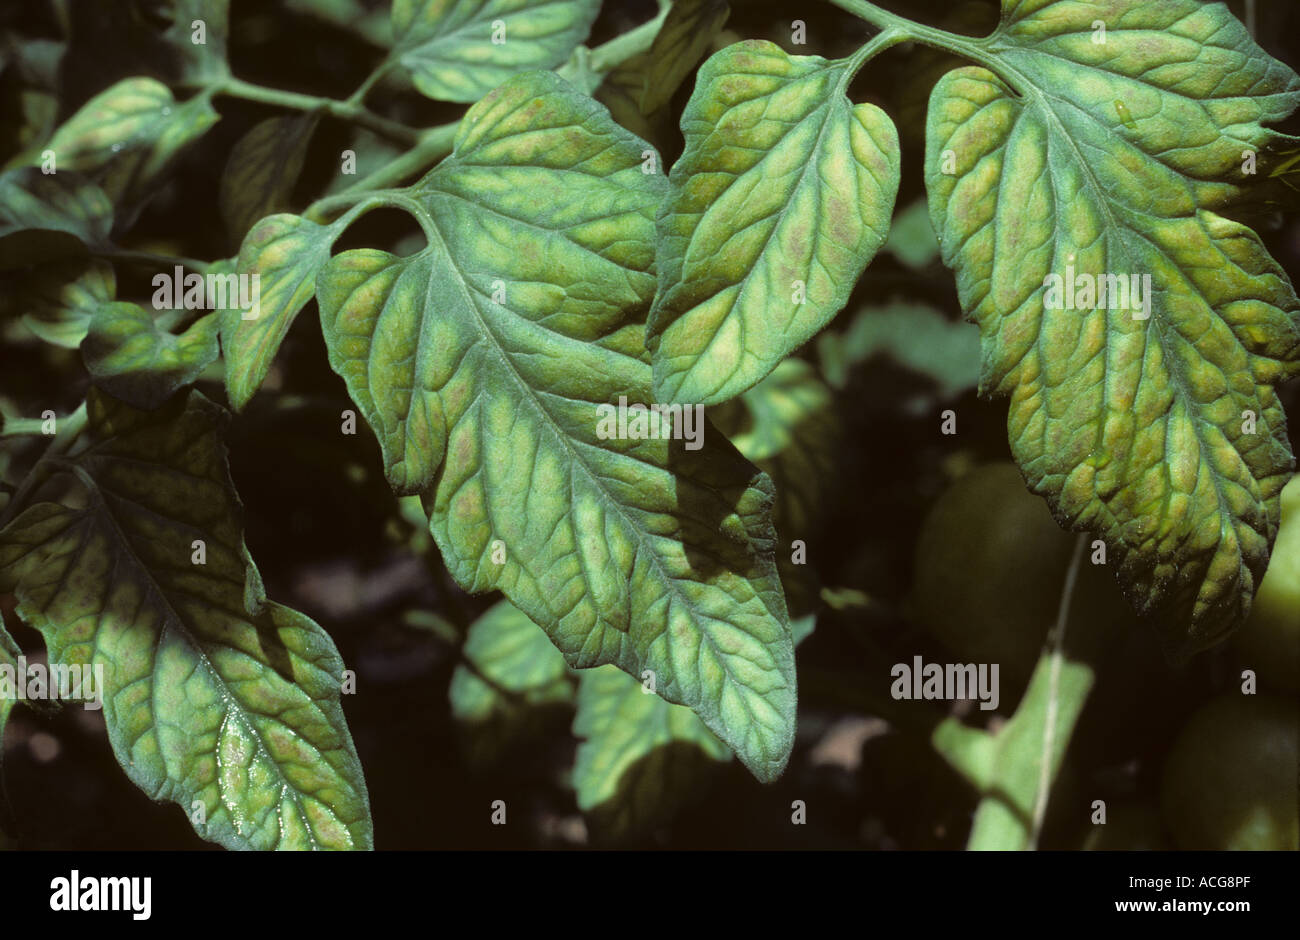 Magnesium Mg deficiency symptoms on tomato leaflets Stock Photo